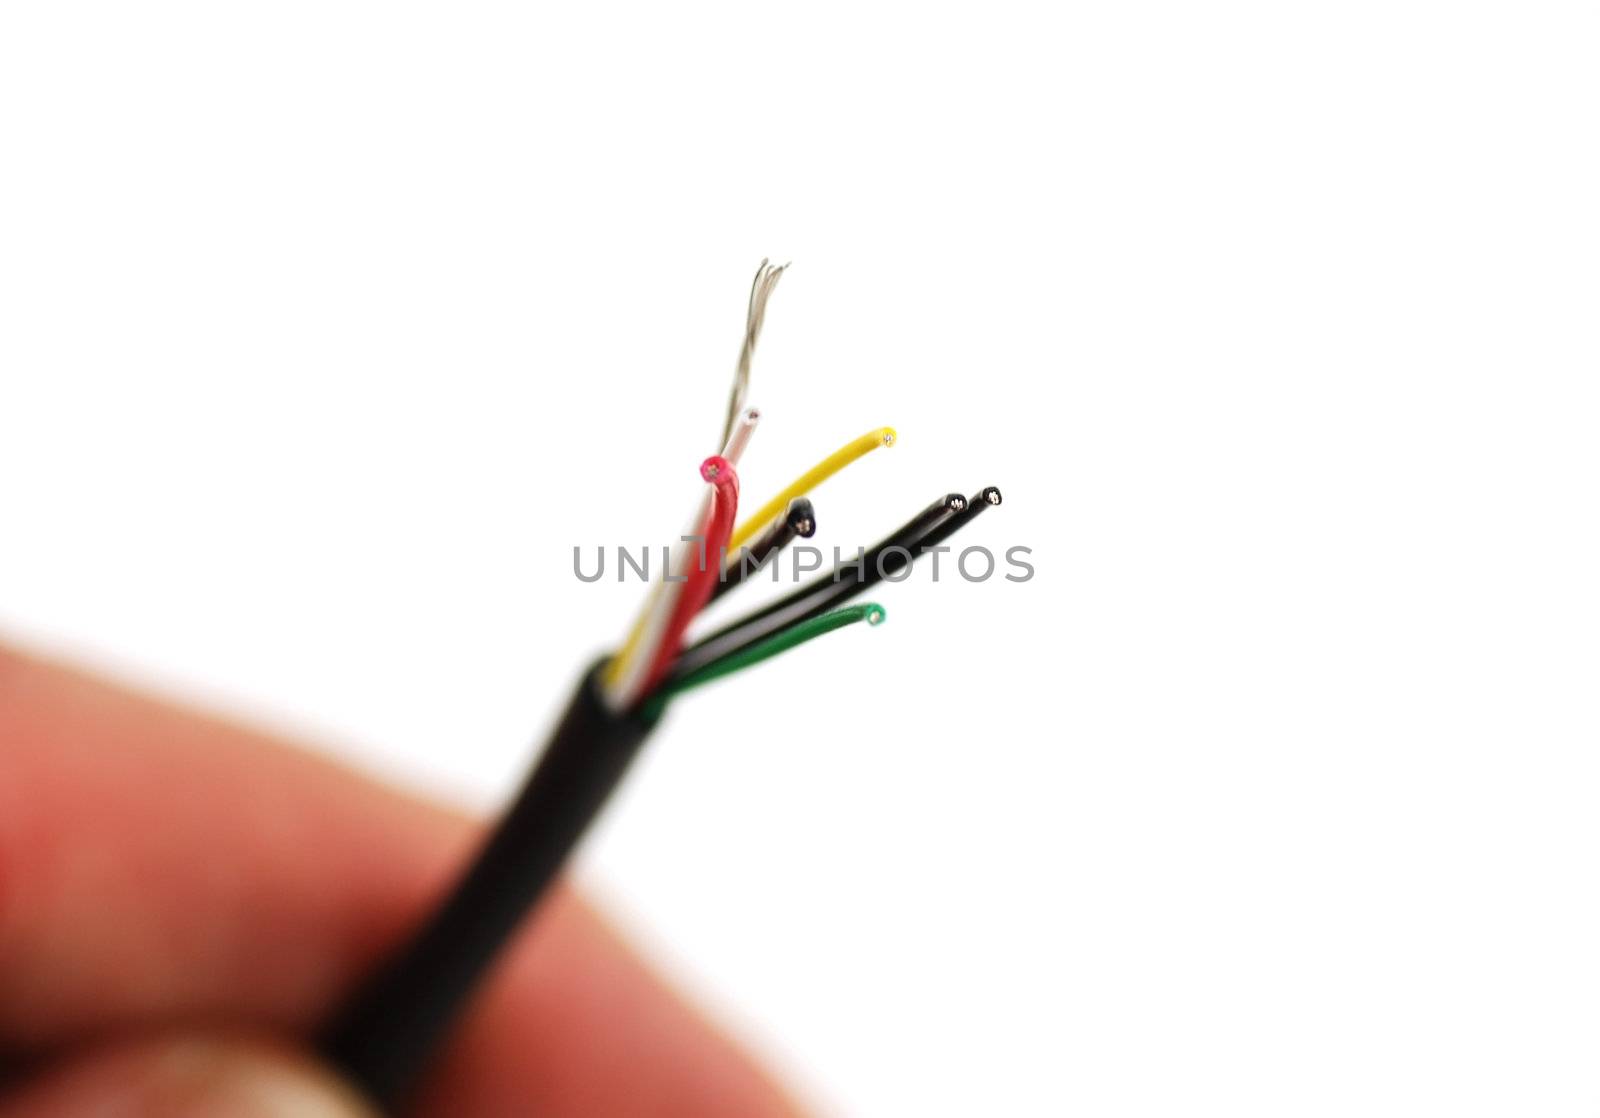 stock pictures of wires and connectors for electrical signals